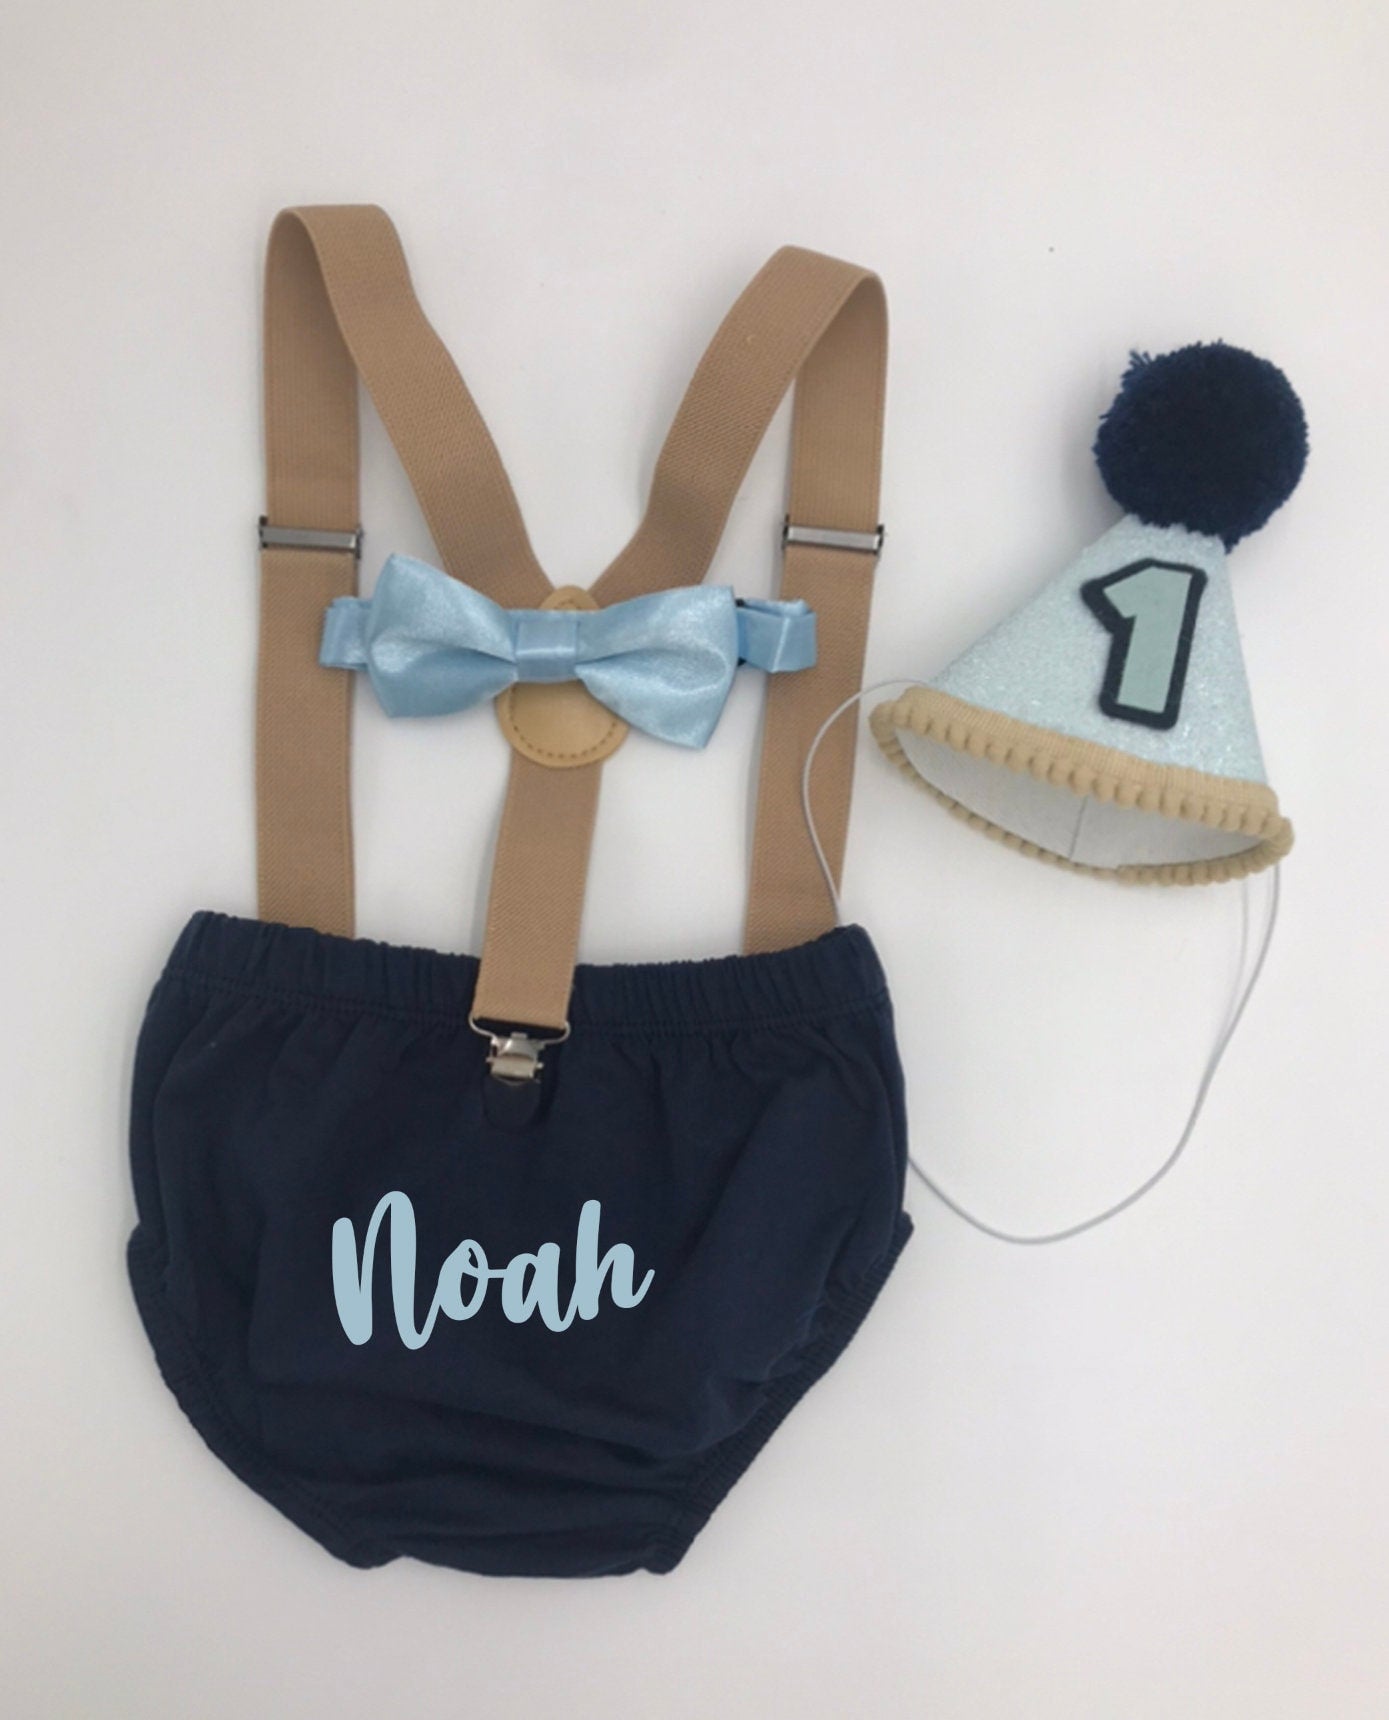 Personalized Smash Cake Outfit - Boy's First Birthday 4-Piece Set with Diaper Cover, Suspenders, and Party Hat